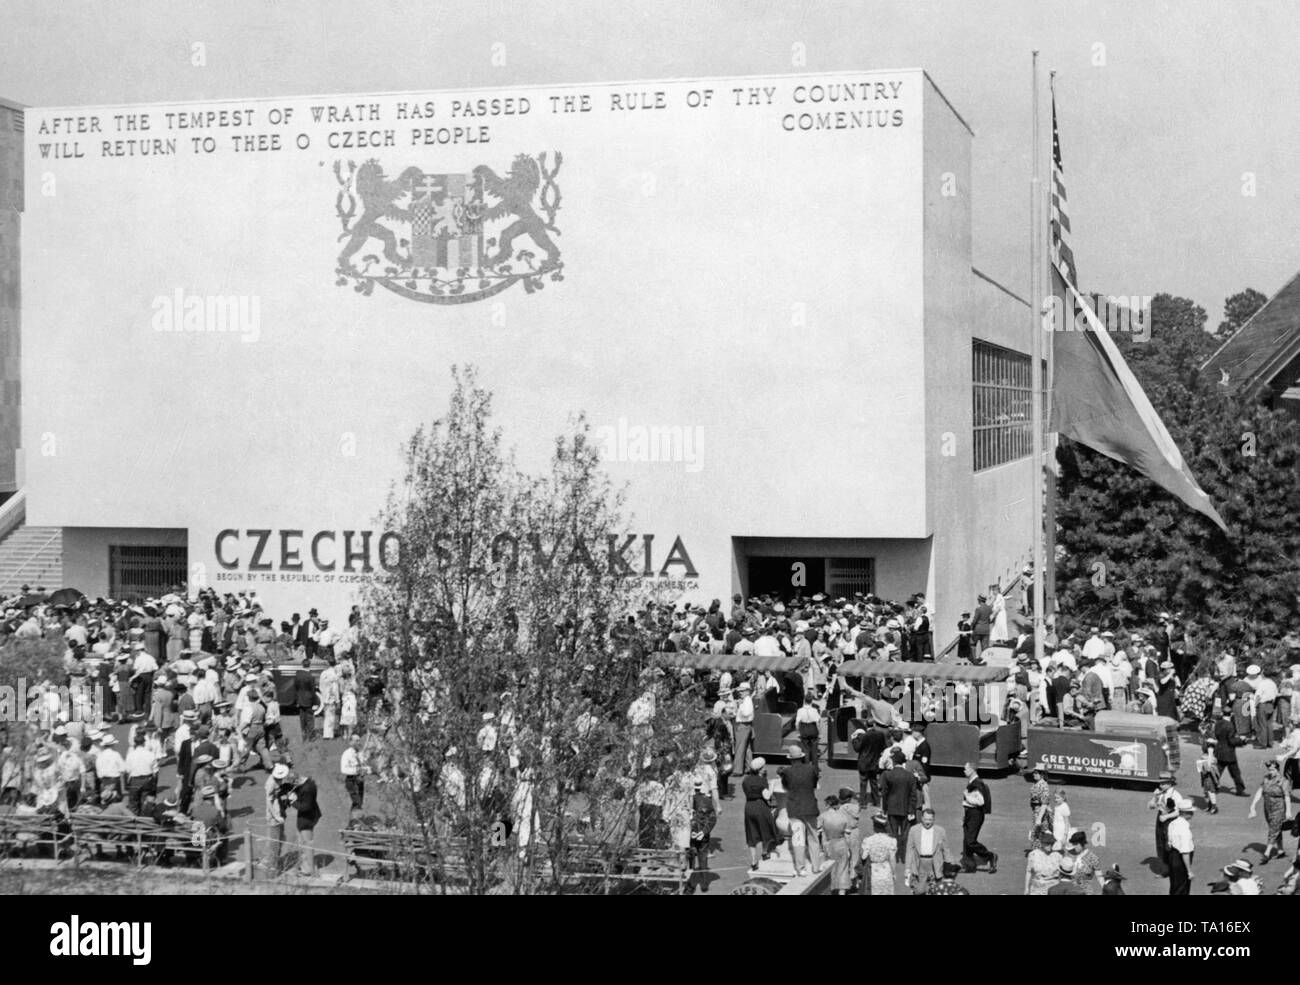 The Czechoslovak Pavilion at the World's Fair in New York, 1939.  On the building: 'After the tempest of wrath has passed the rule of thy country will return to thee o Czech people'. In March 1939, Slovakia split from the Czech Republic on Hitler's command, and Bohemia and Moravia were occupied by the German troops. Stock Photo